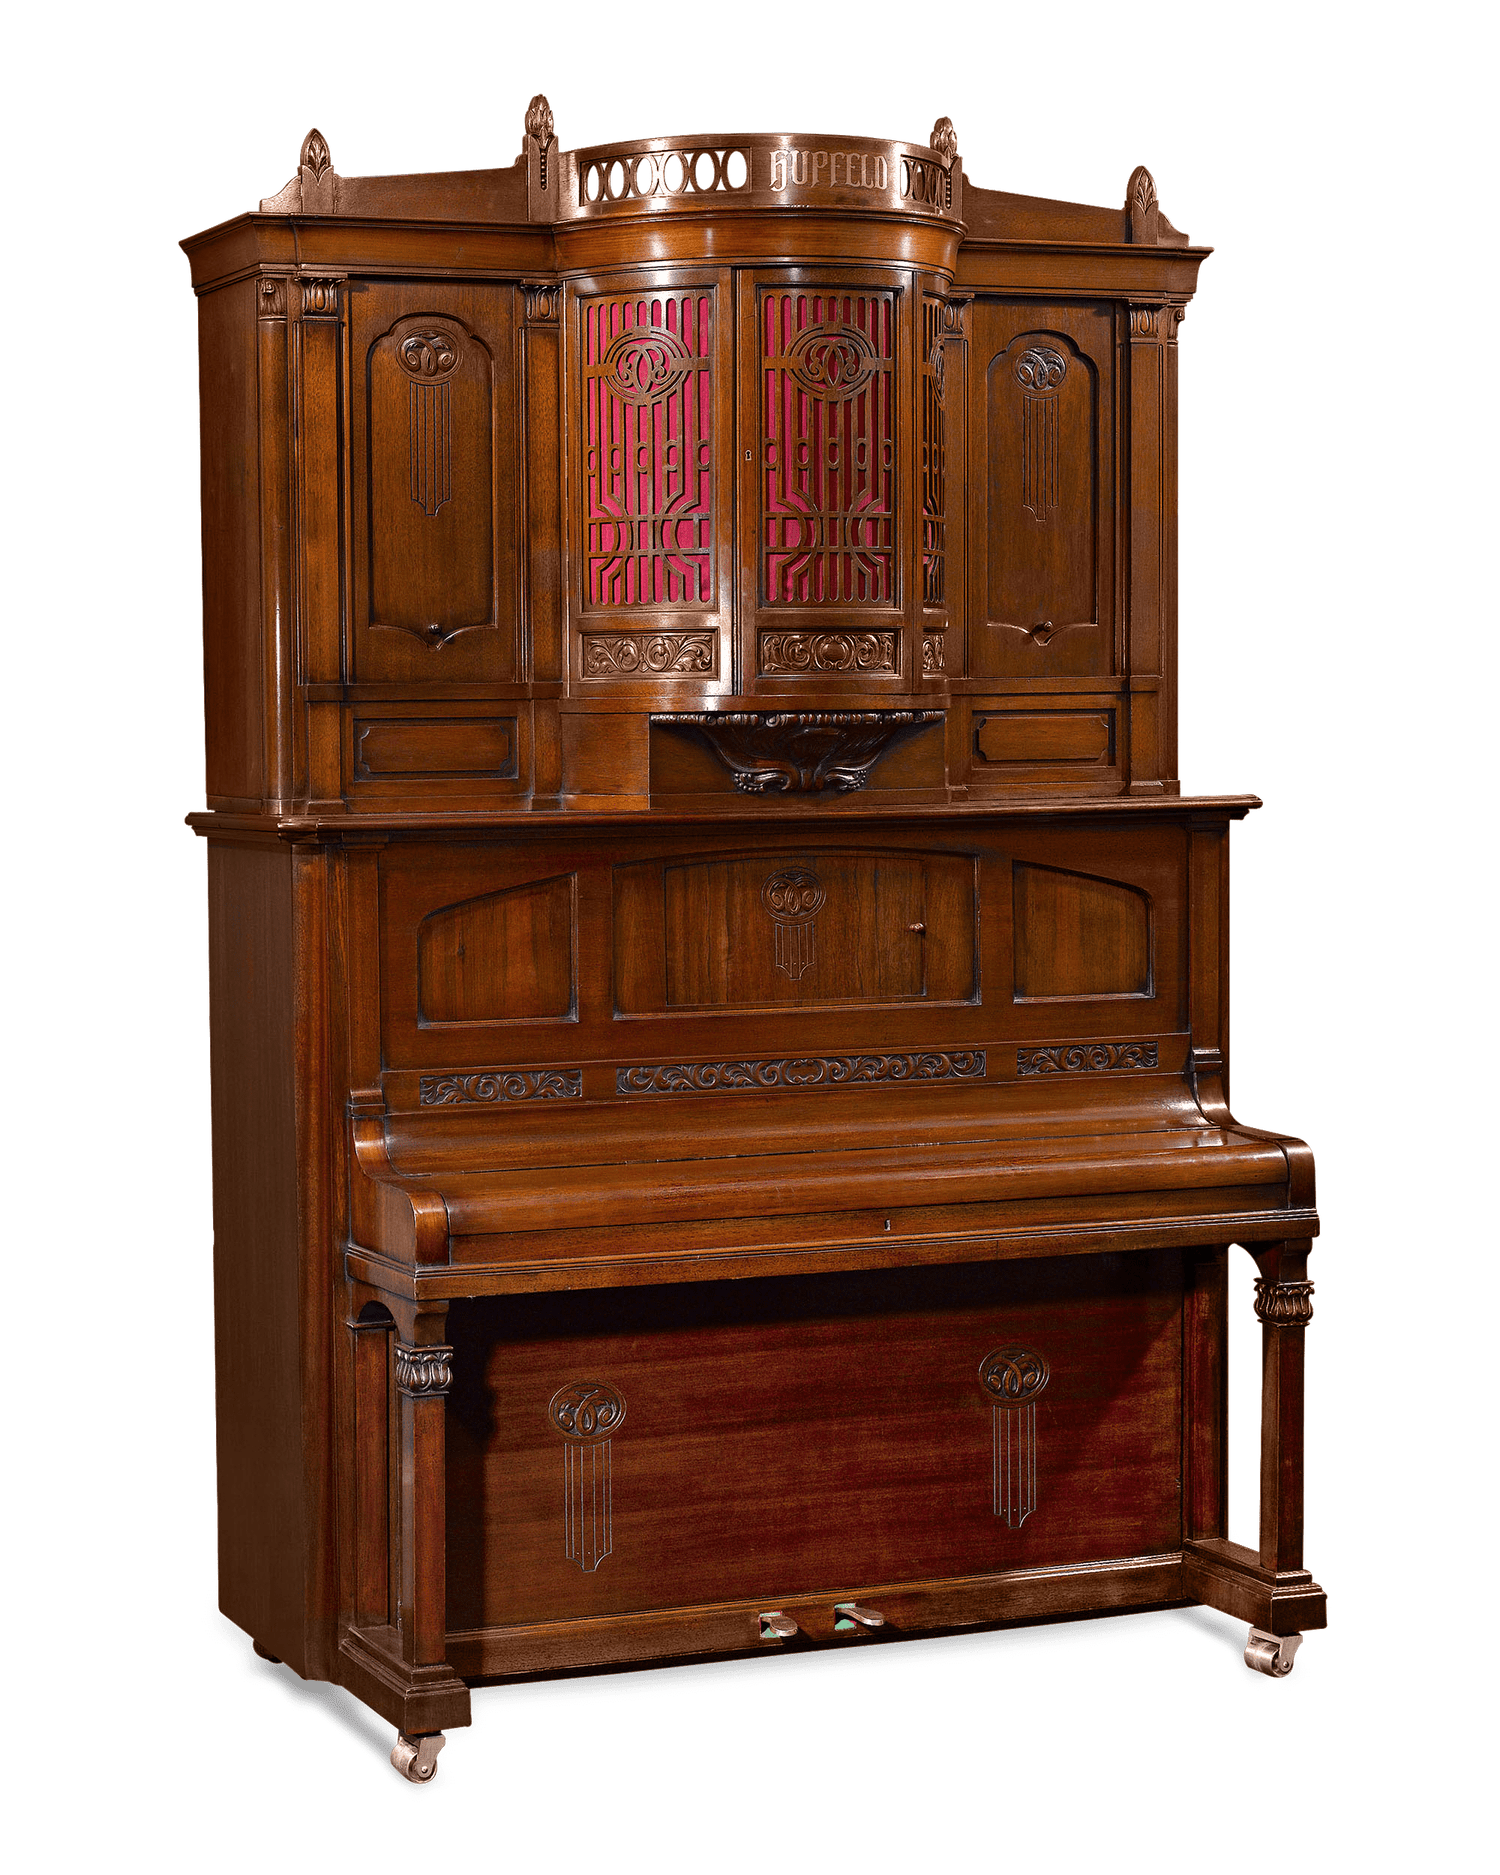 Crafted in 1910, this machine is the most advanced automatic music player of its time